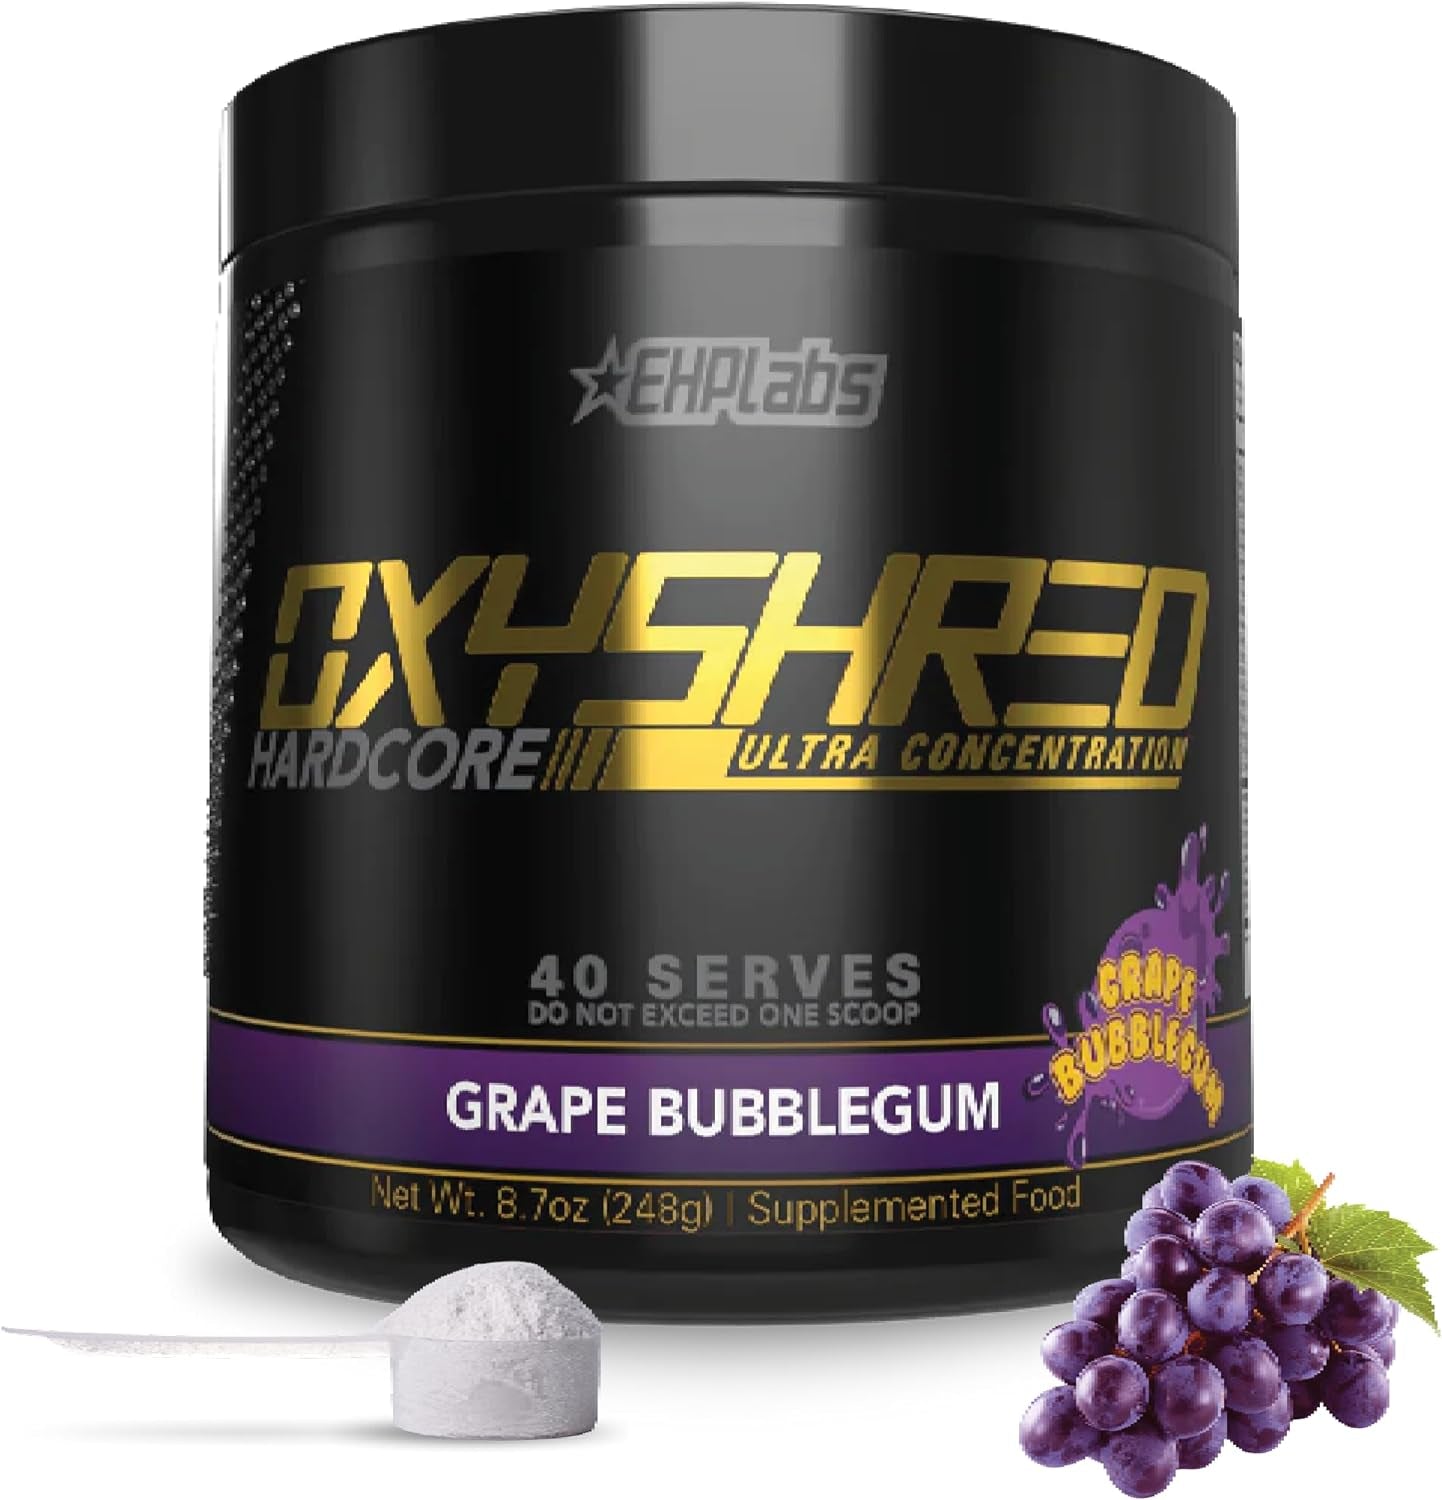 Ehplabs Oxyshred Hardcore Thermogenic Pre Workout Shredding Supplement - Promotes Shredding, Energy Booster, Pre-Workout, Mood Booster - Grape Bubblegum, 40 Servings